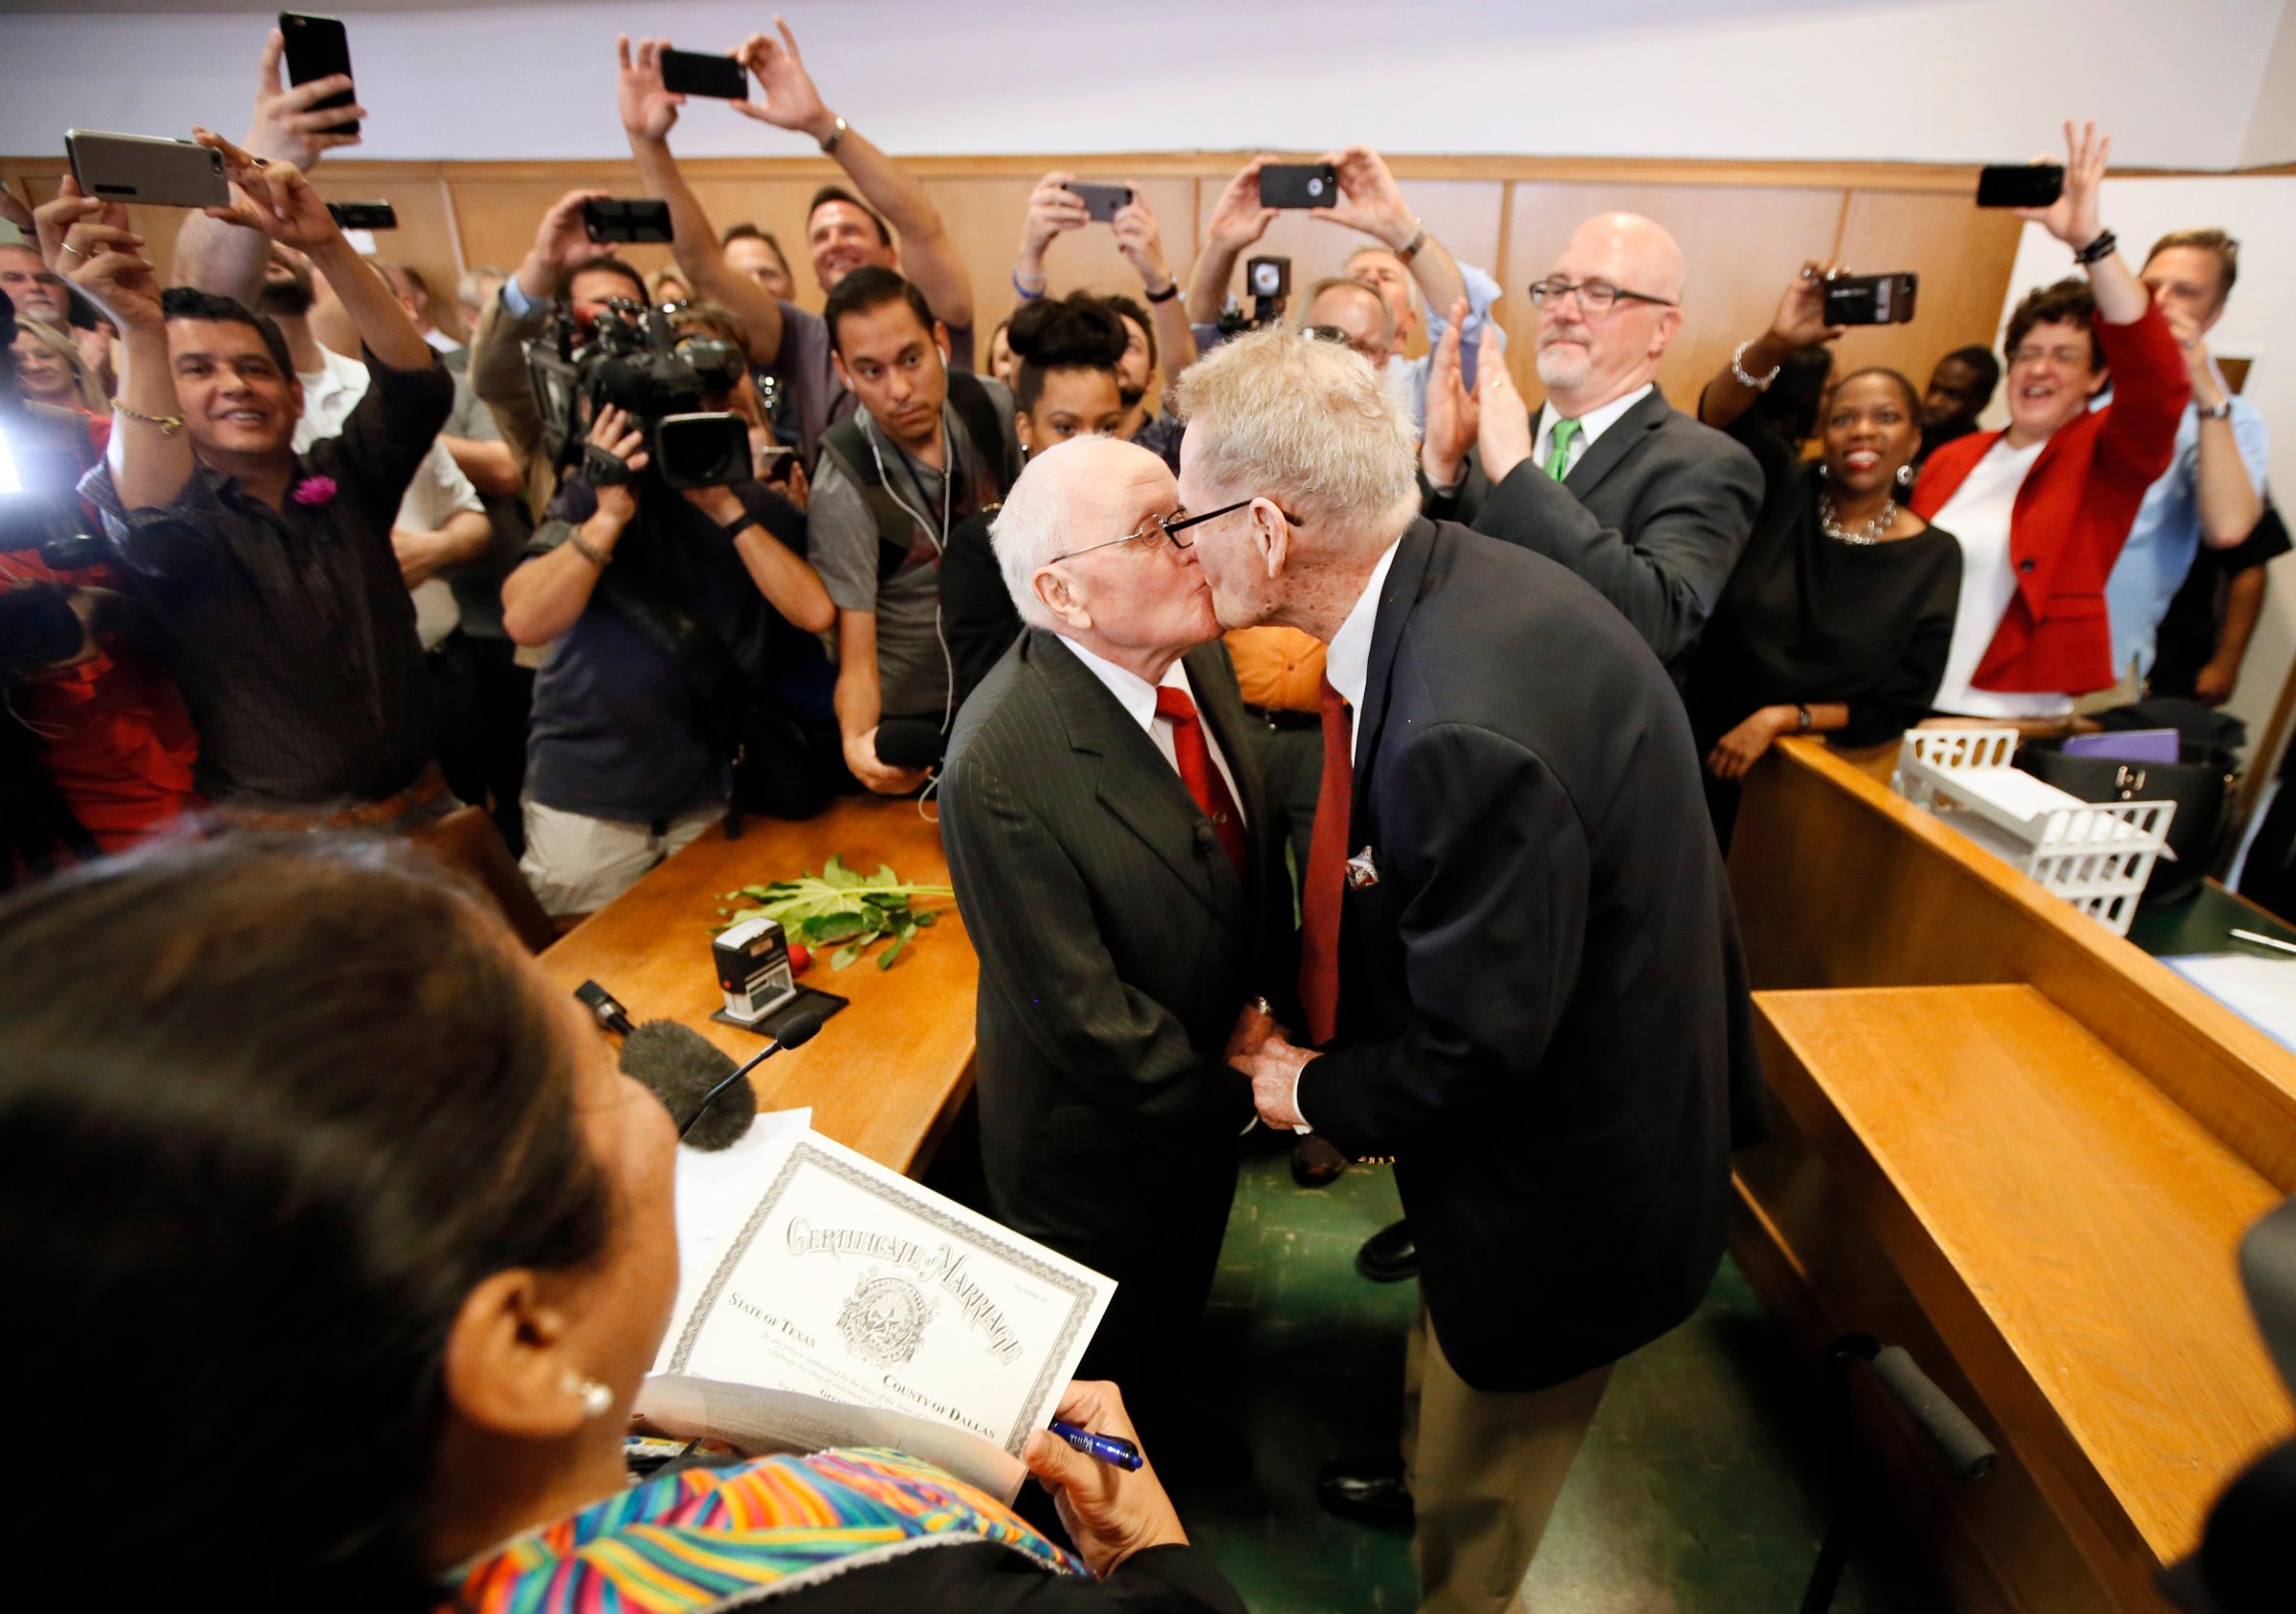 Judge Dennise Garcia, left front, watches as George Harris, center left, 82, and Jack Evans, center right, 85, kiss after being married by Judge Garcia in Dallas on June 26, 2015.